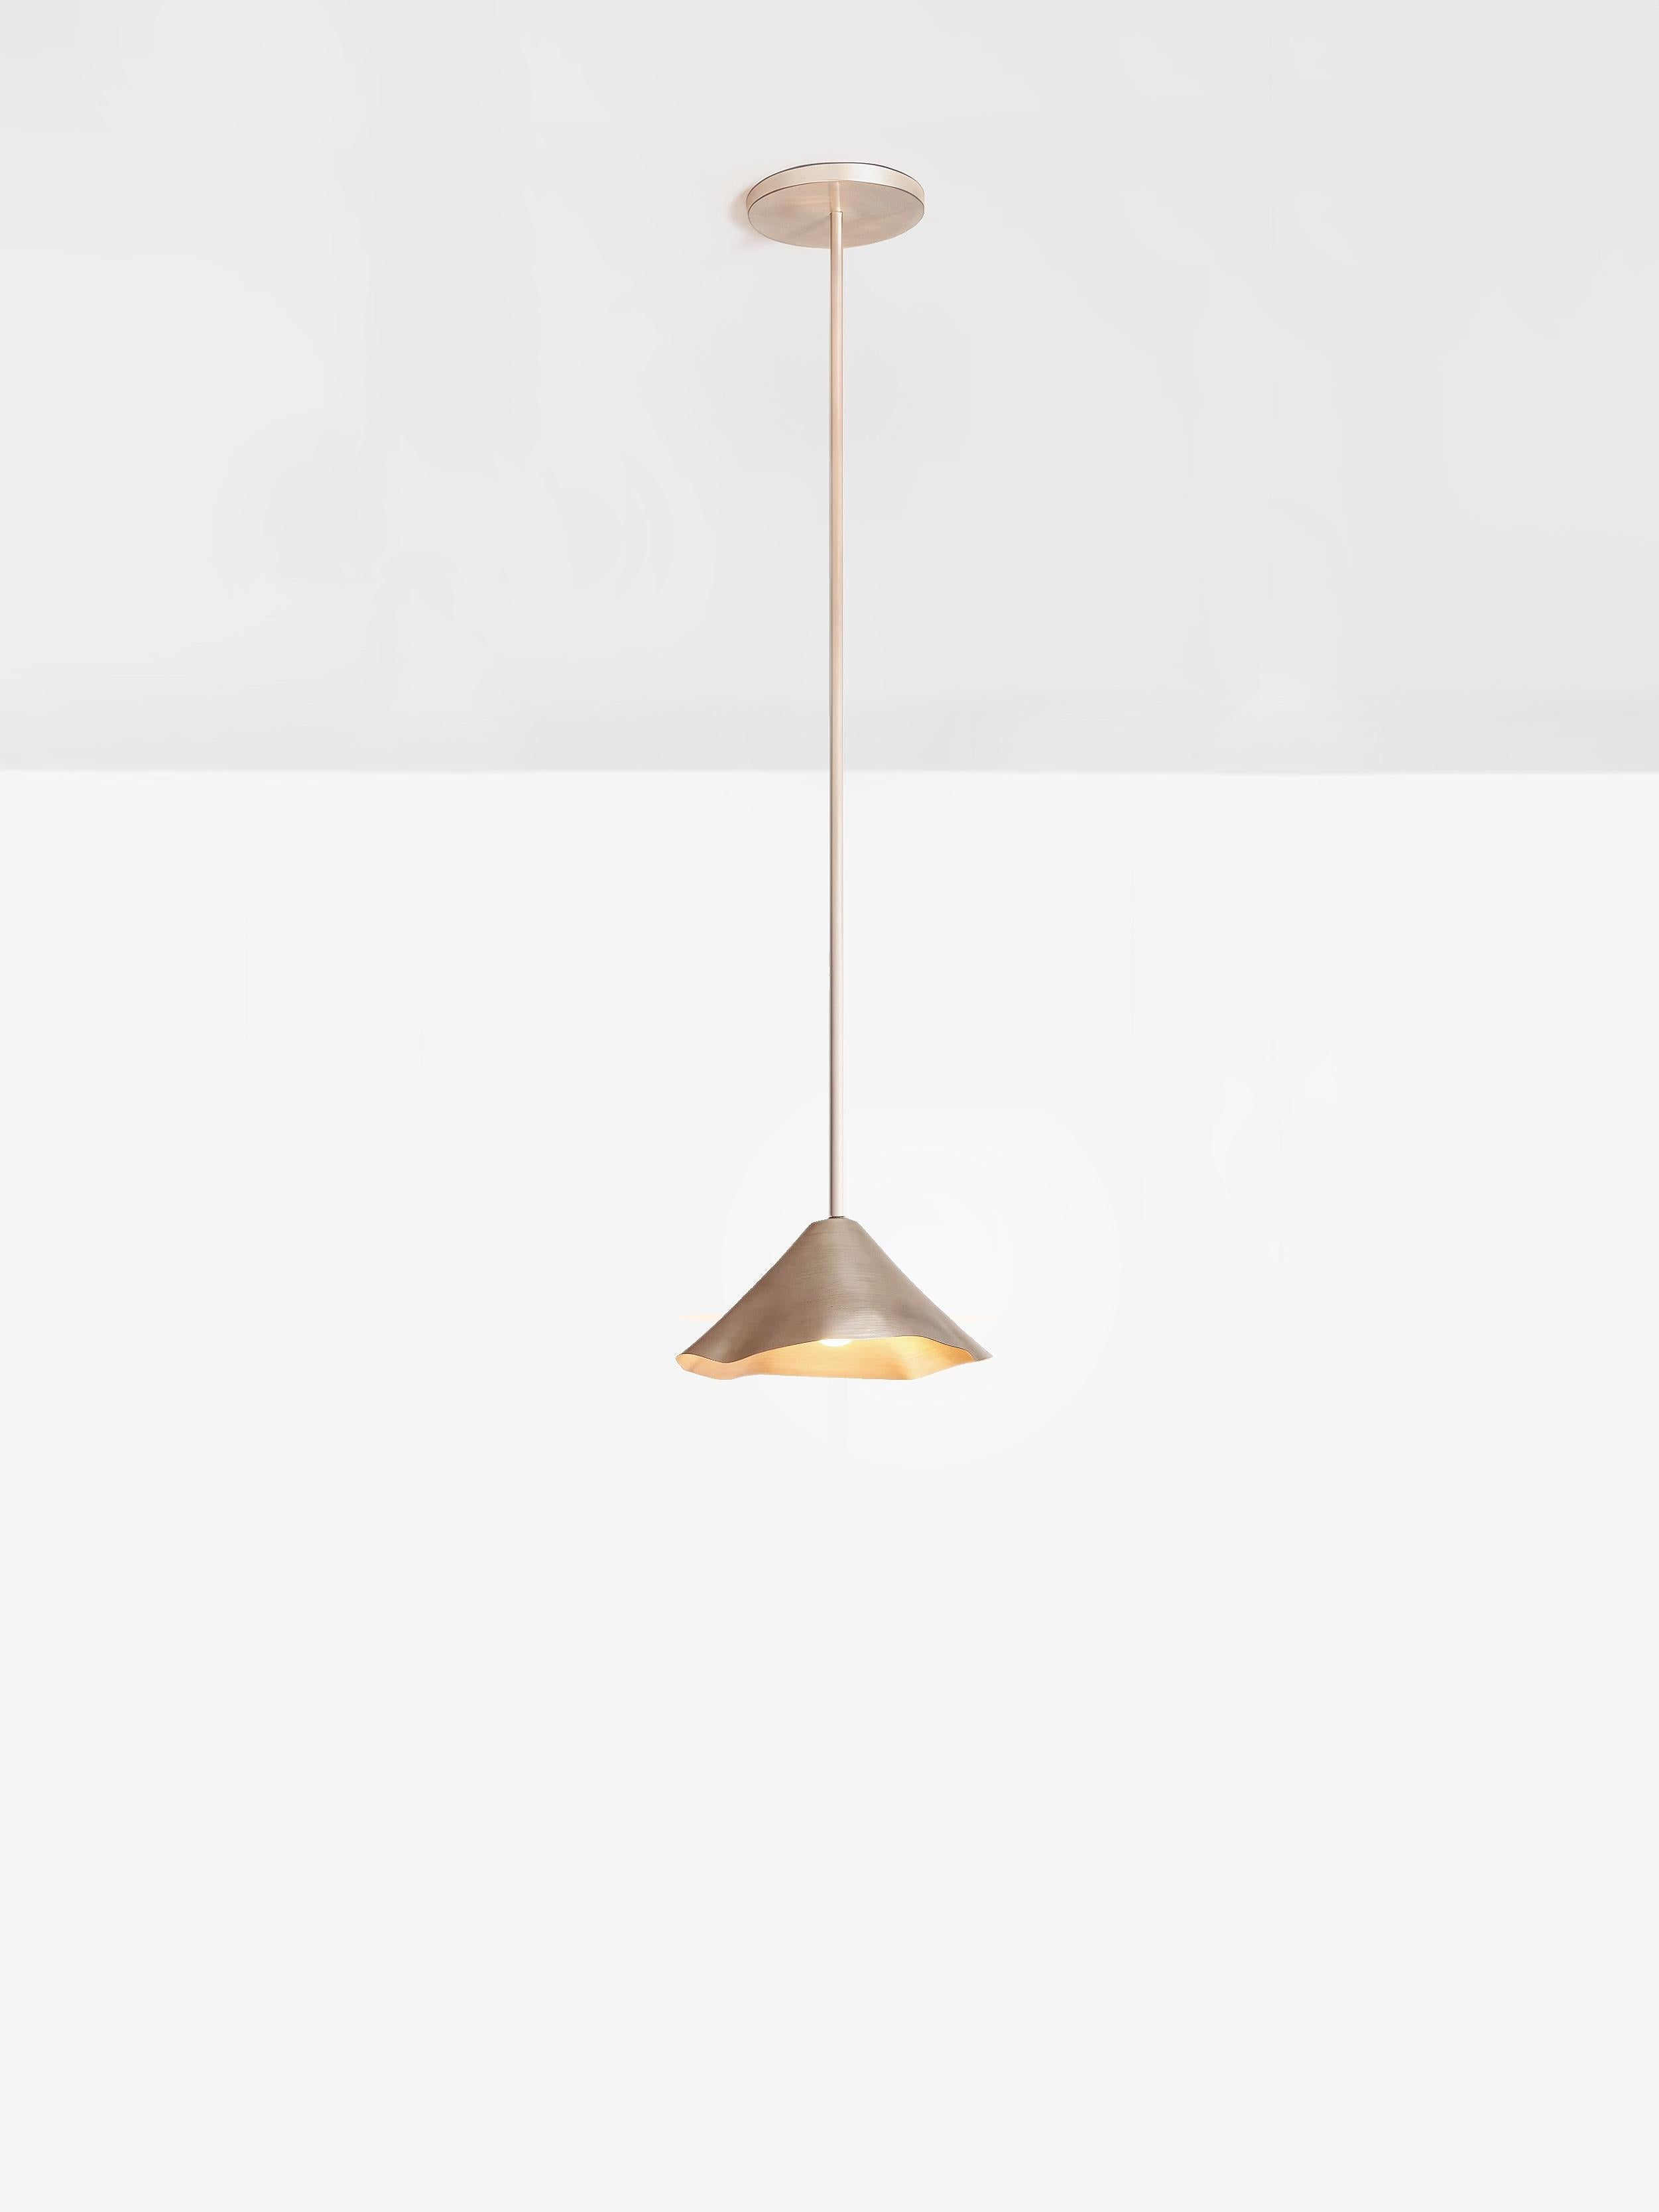 Silver Antica VIII Single Pendant by OHLA STUDIO
Dimensions: D 40 x W 40 x H 150 cm 
Materials: Copper.
5 kg

Available in other finishes: Silver, Forest, and Teal.

A pre-Hispanic smithing tradition thrives by recycling copper scraps into